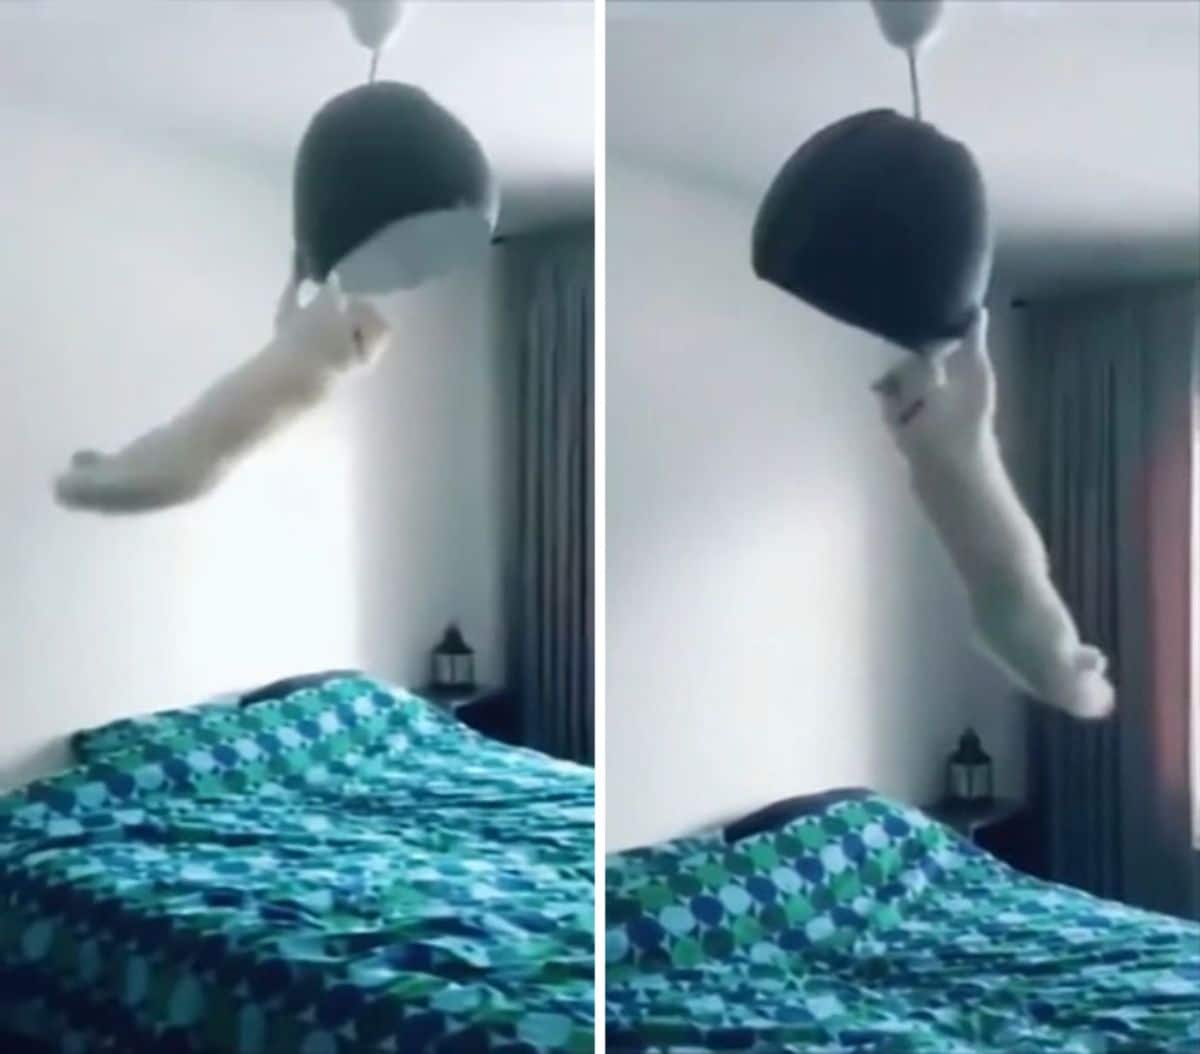 2 photos of a white cat hanging on a lampshade from a light bulb on the ceiling